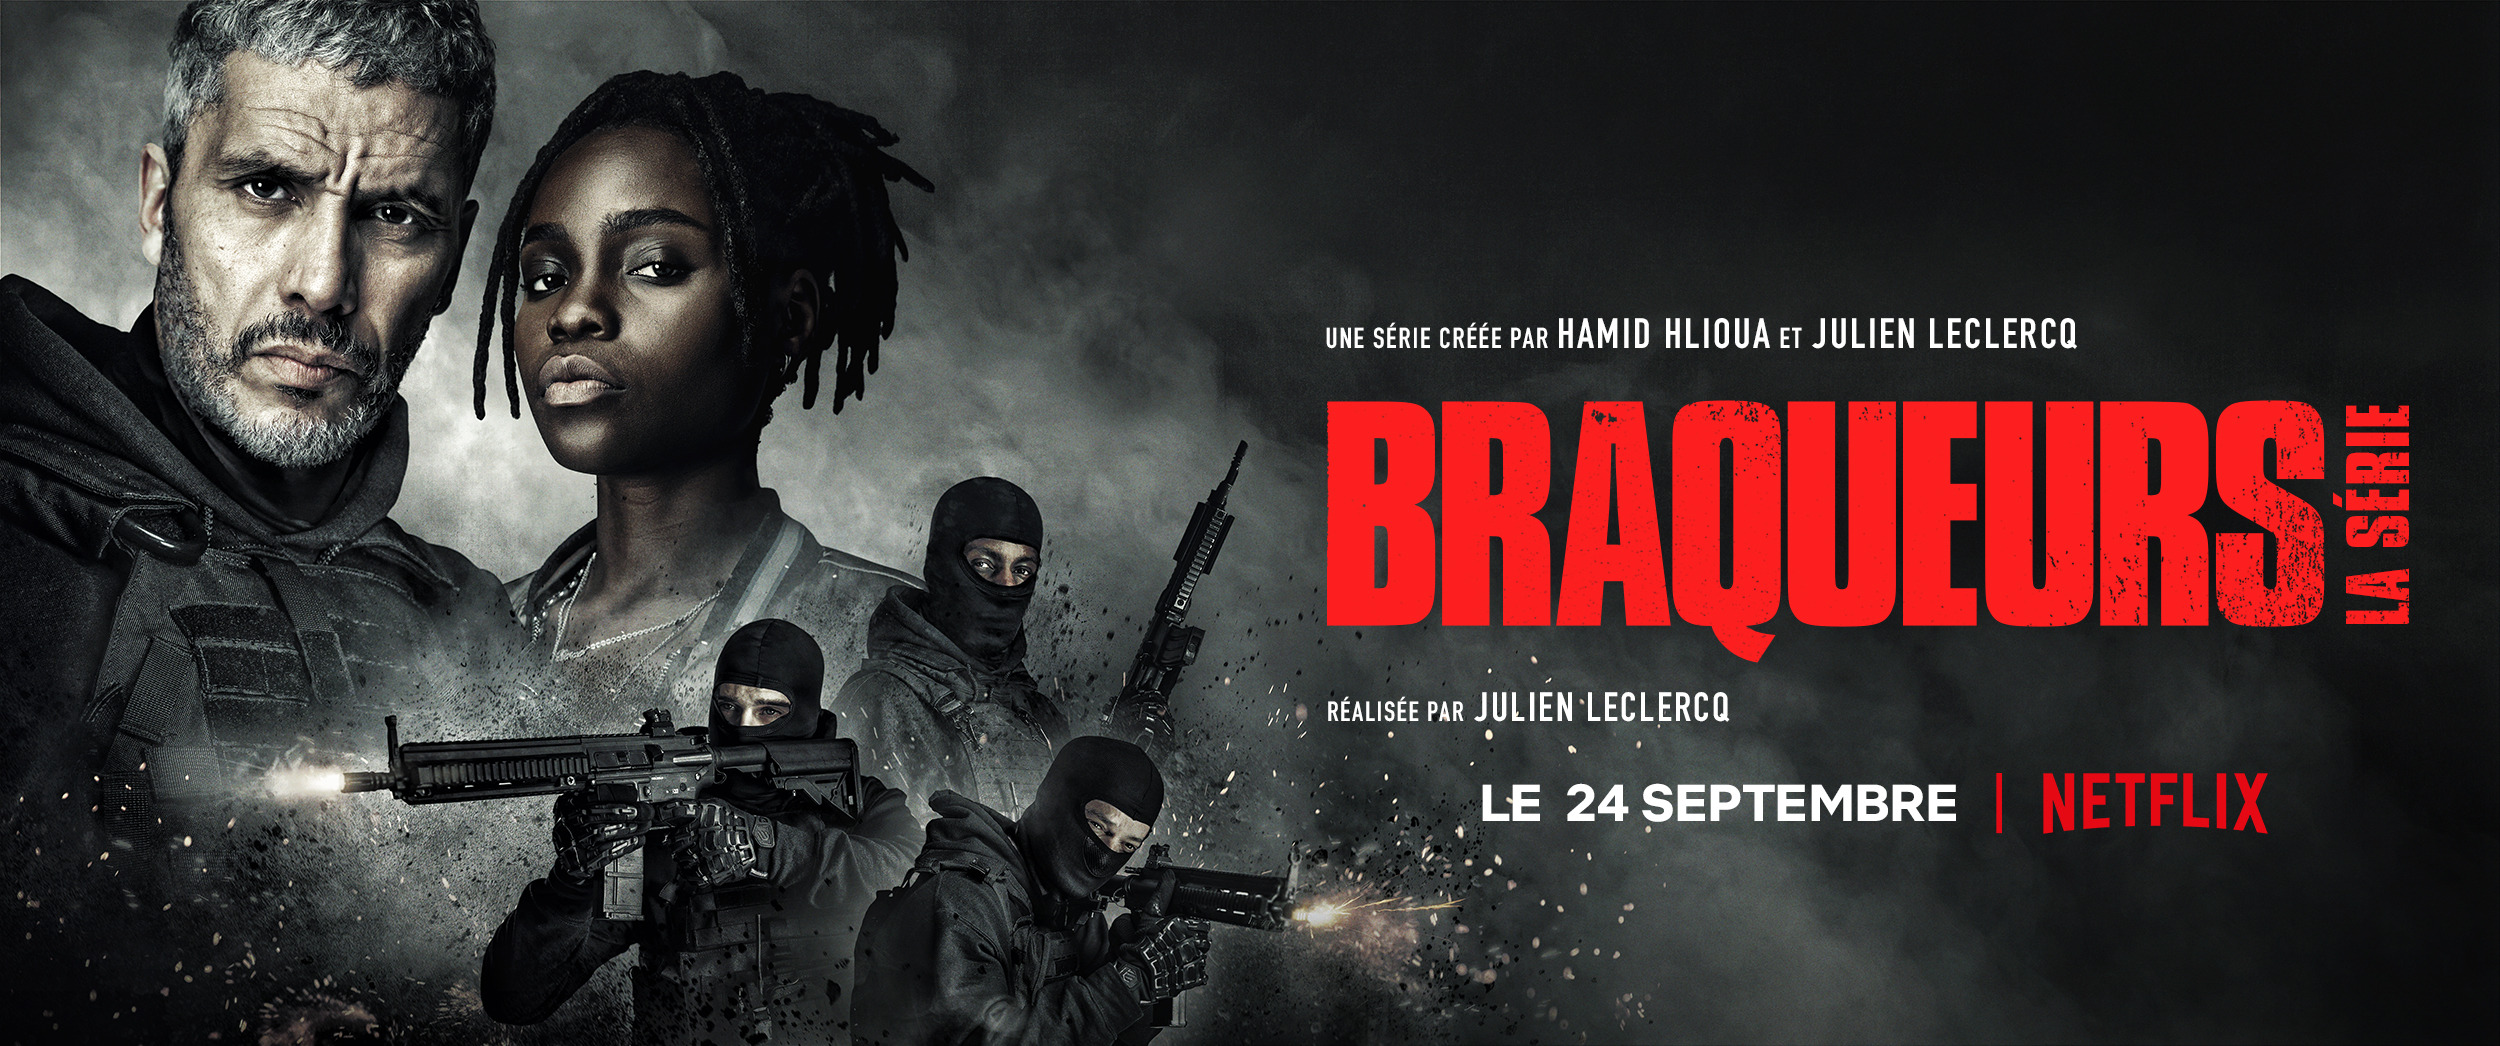 Mega Sized TV Poster Image for Braqueurs (#2 of 2)